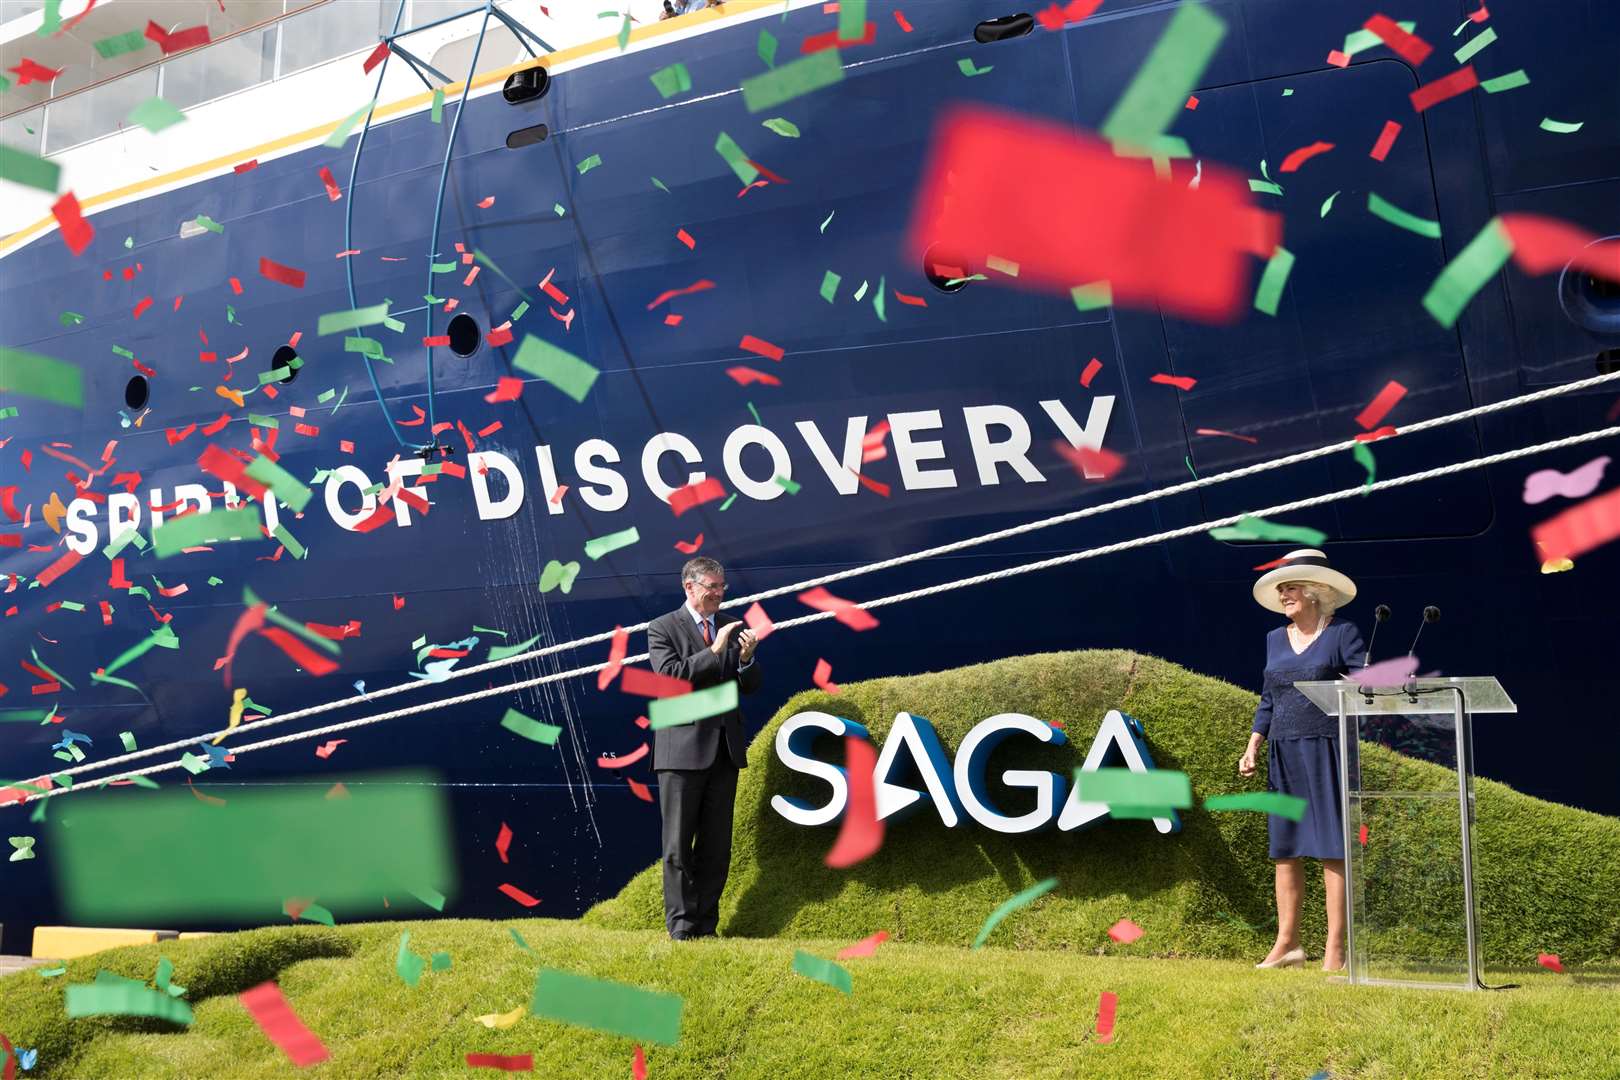 The Duchess of Cornwall launched Saga's Spirit of Discovery cruise ship last year in Dover